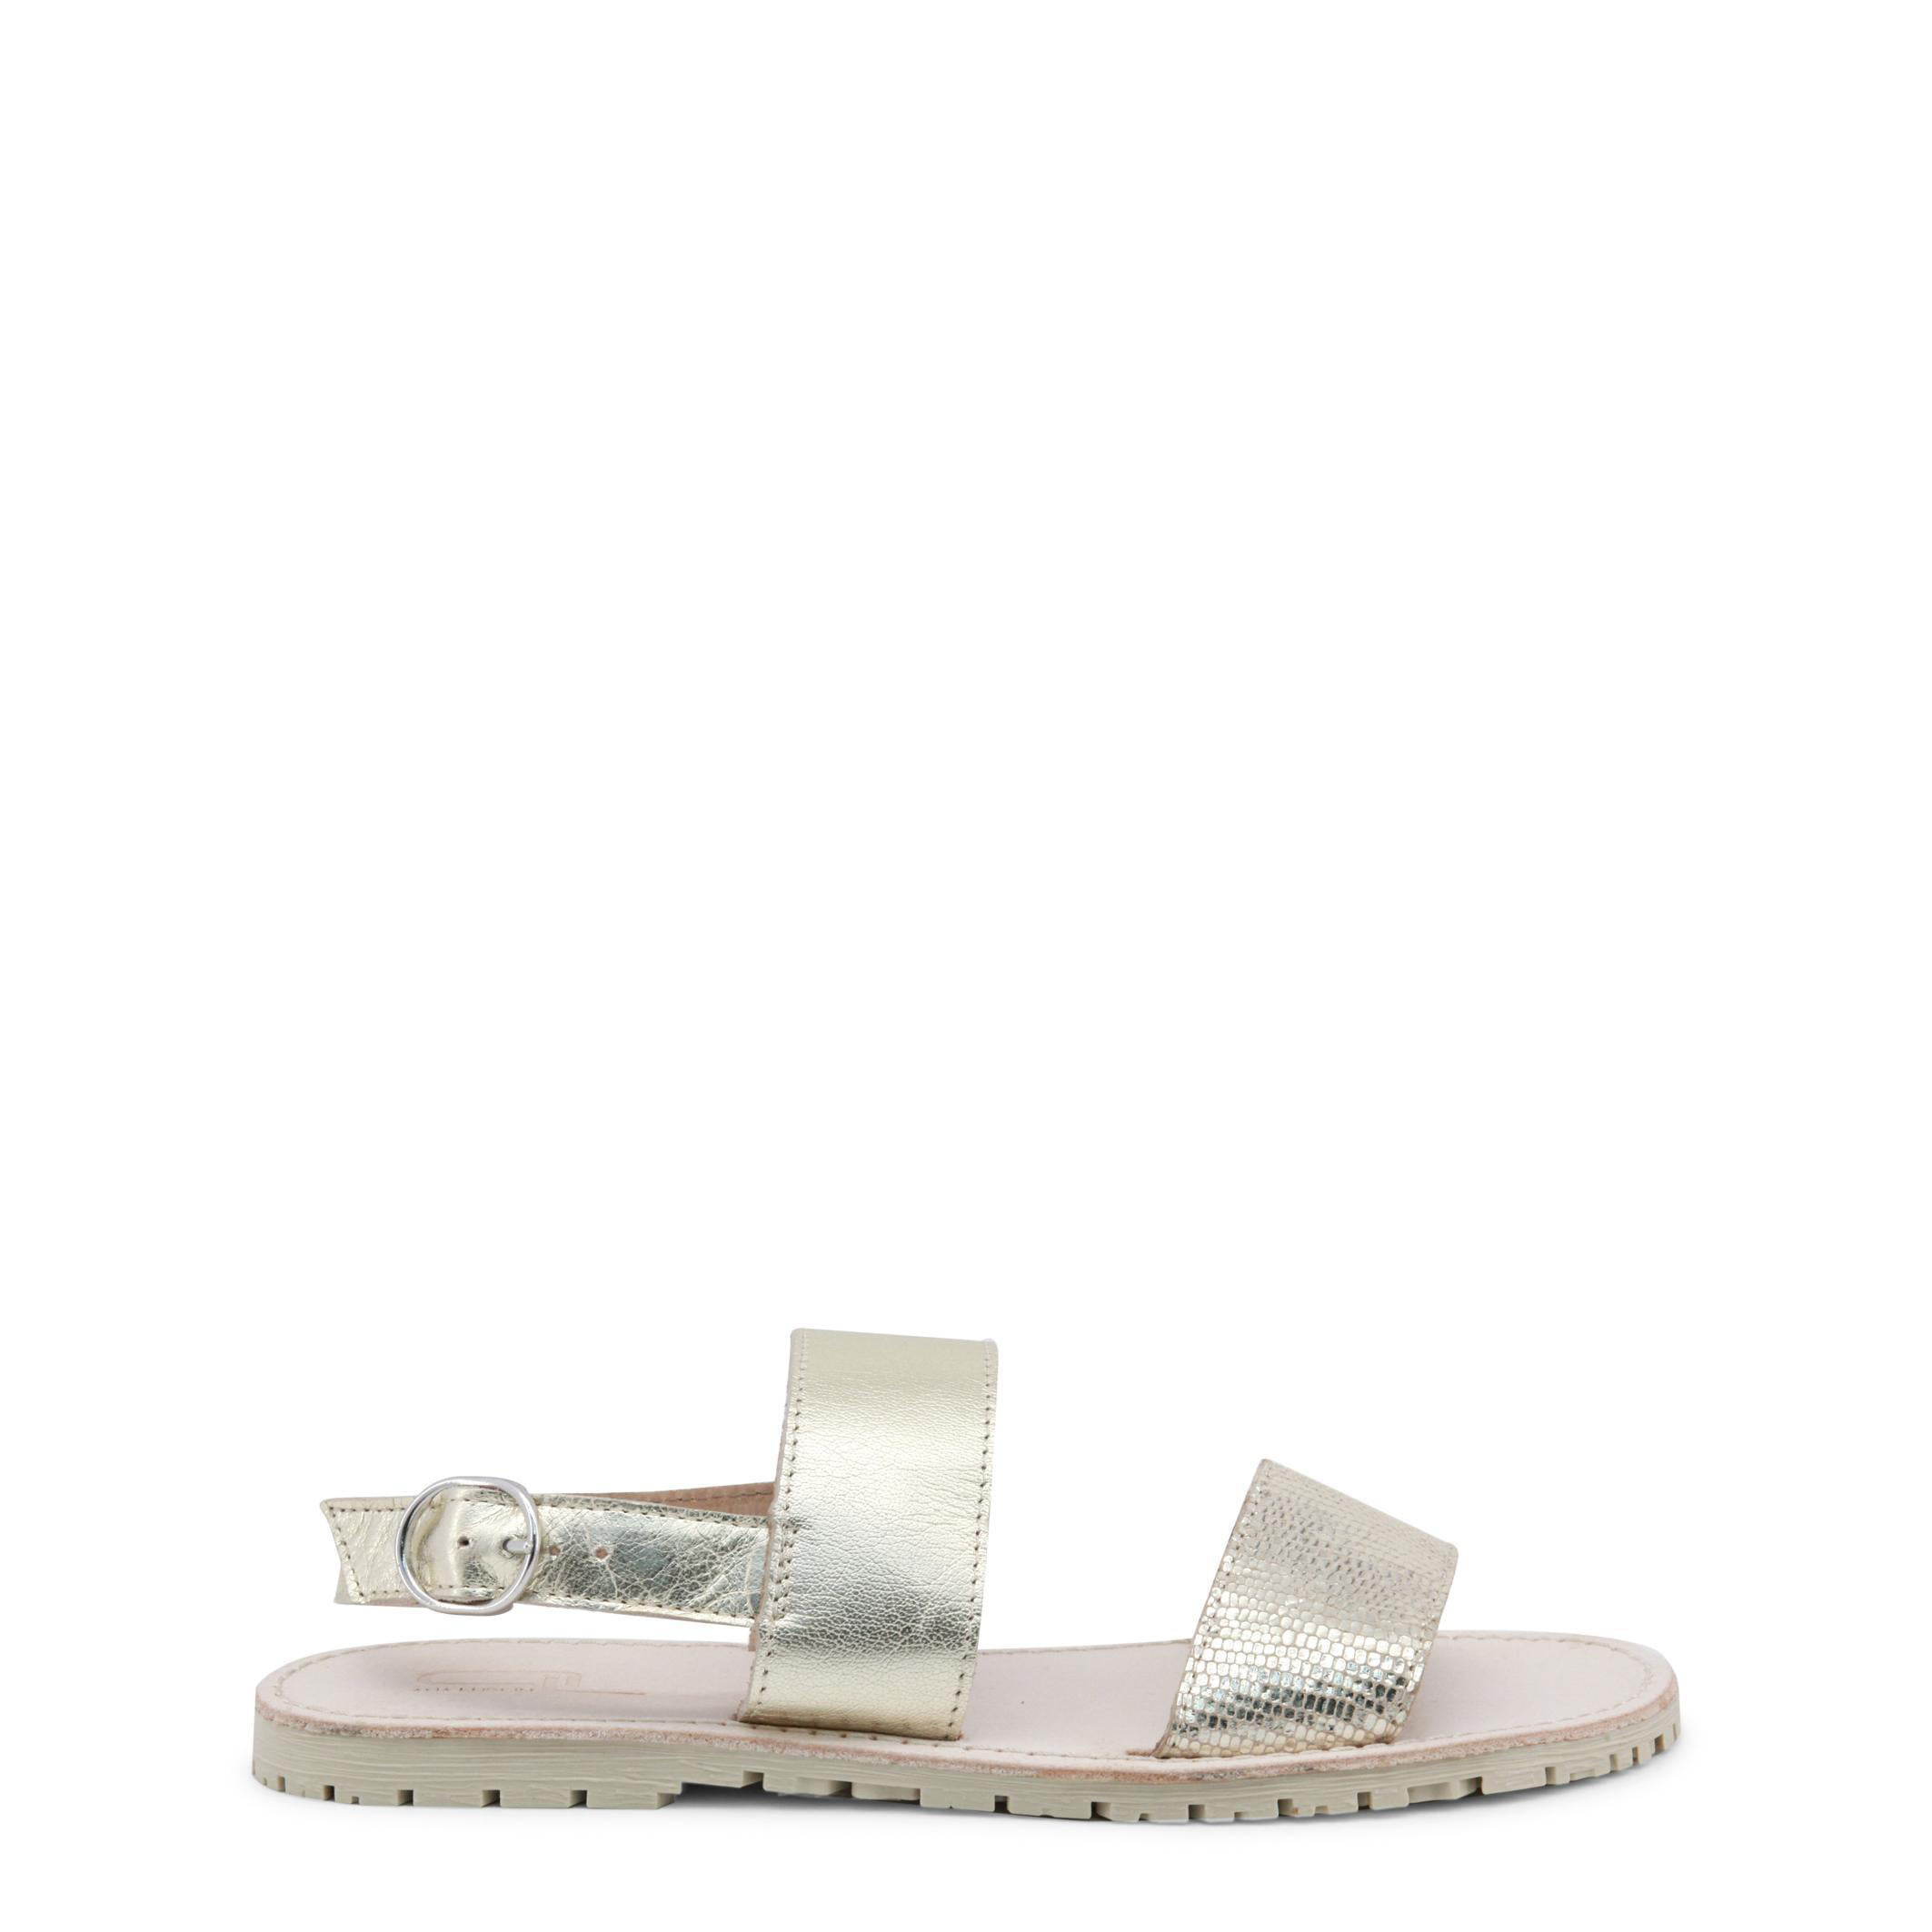 Mules ANA LUBLIN 36 silver Women Shoes Ana Lublin Women Sandals Ana Lublin Women Mules Ana Lublin Women Mules Ana Lublin Women 